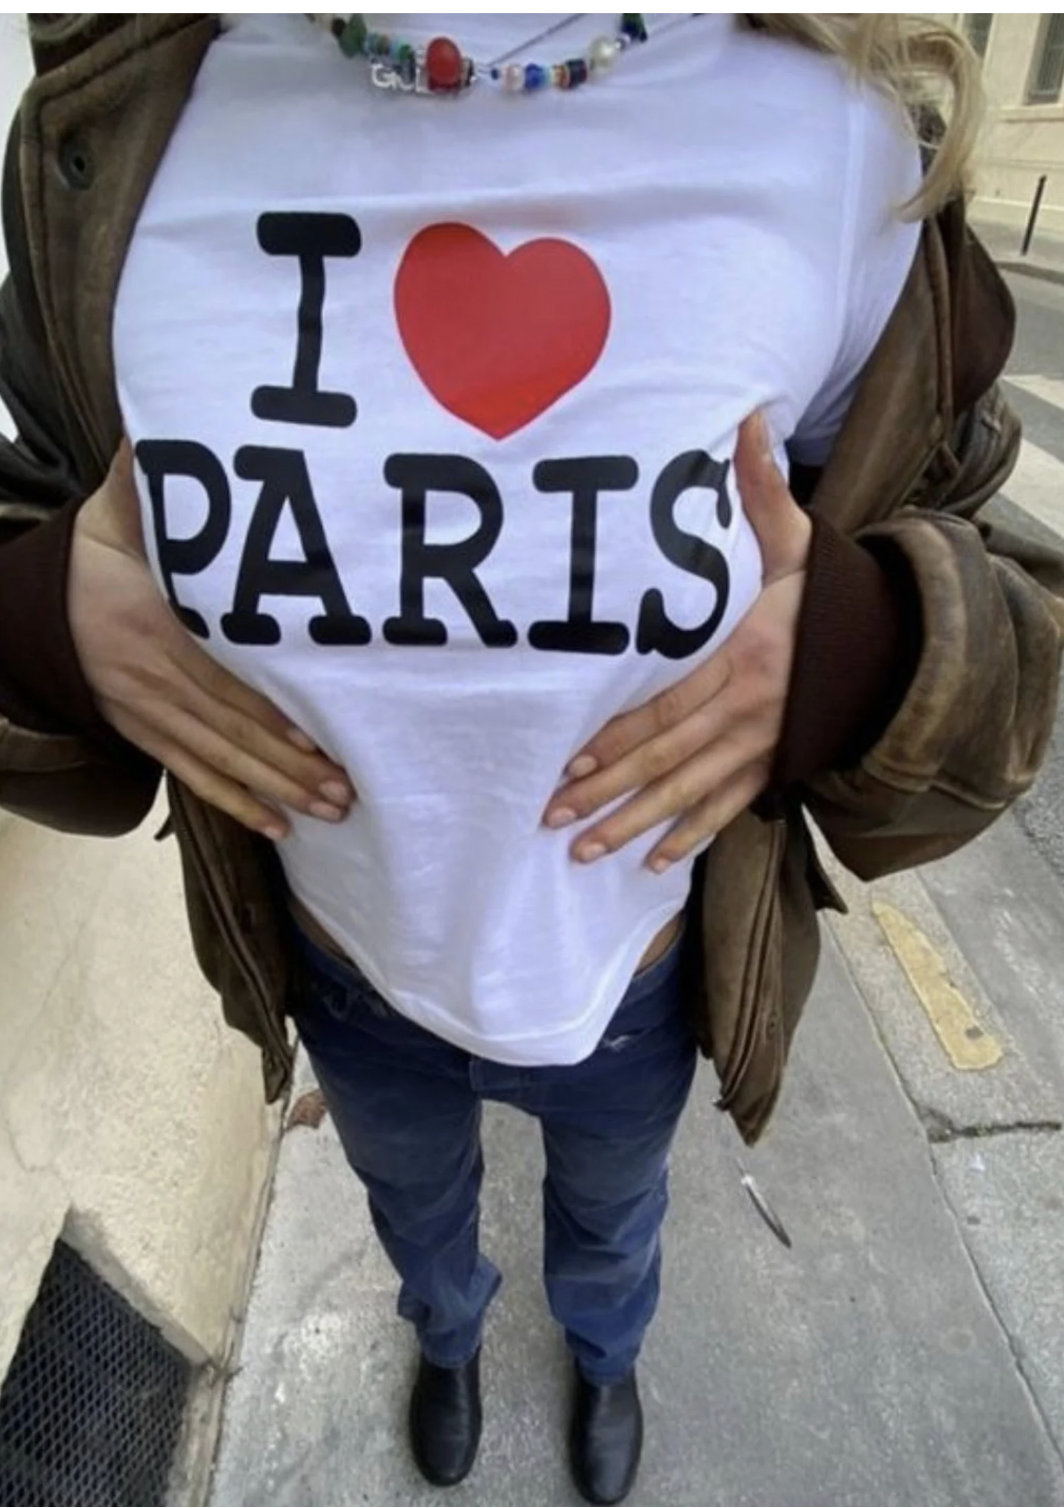 I Love Paris Y2K Clothing Graphic Tee - Cute Gift for Girlfriend